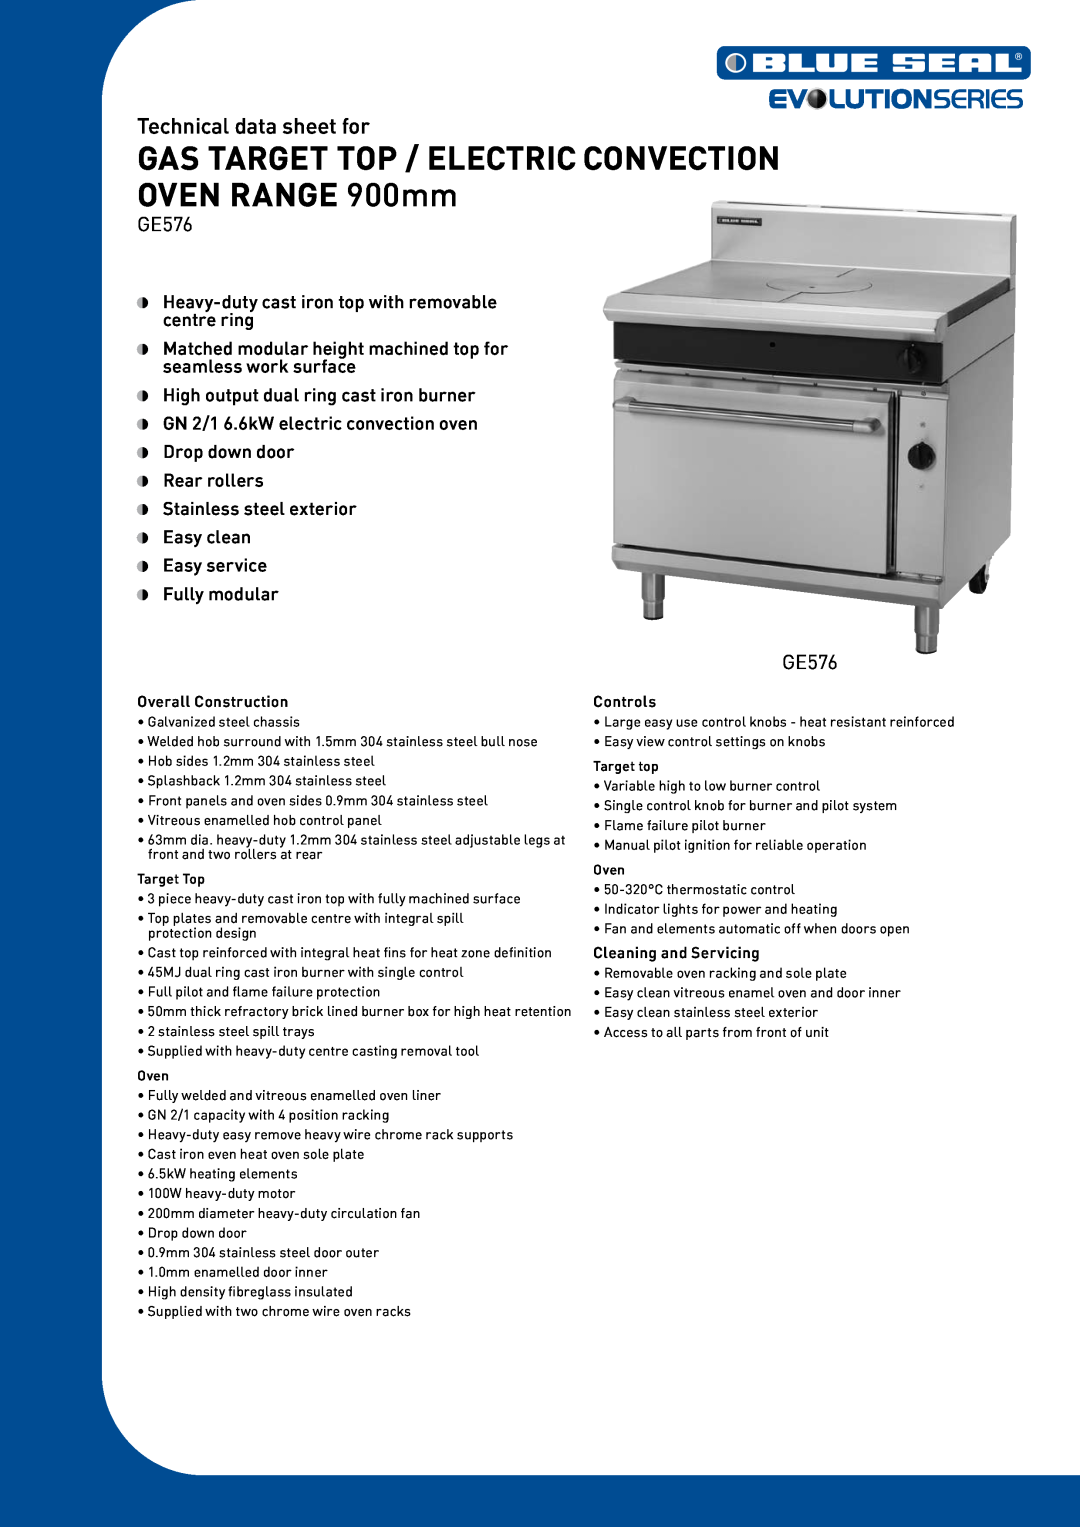 Moffat GE576 manual Technical data sheet for, Overall Construction, Controls, Cleaning and Servicing 